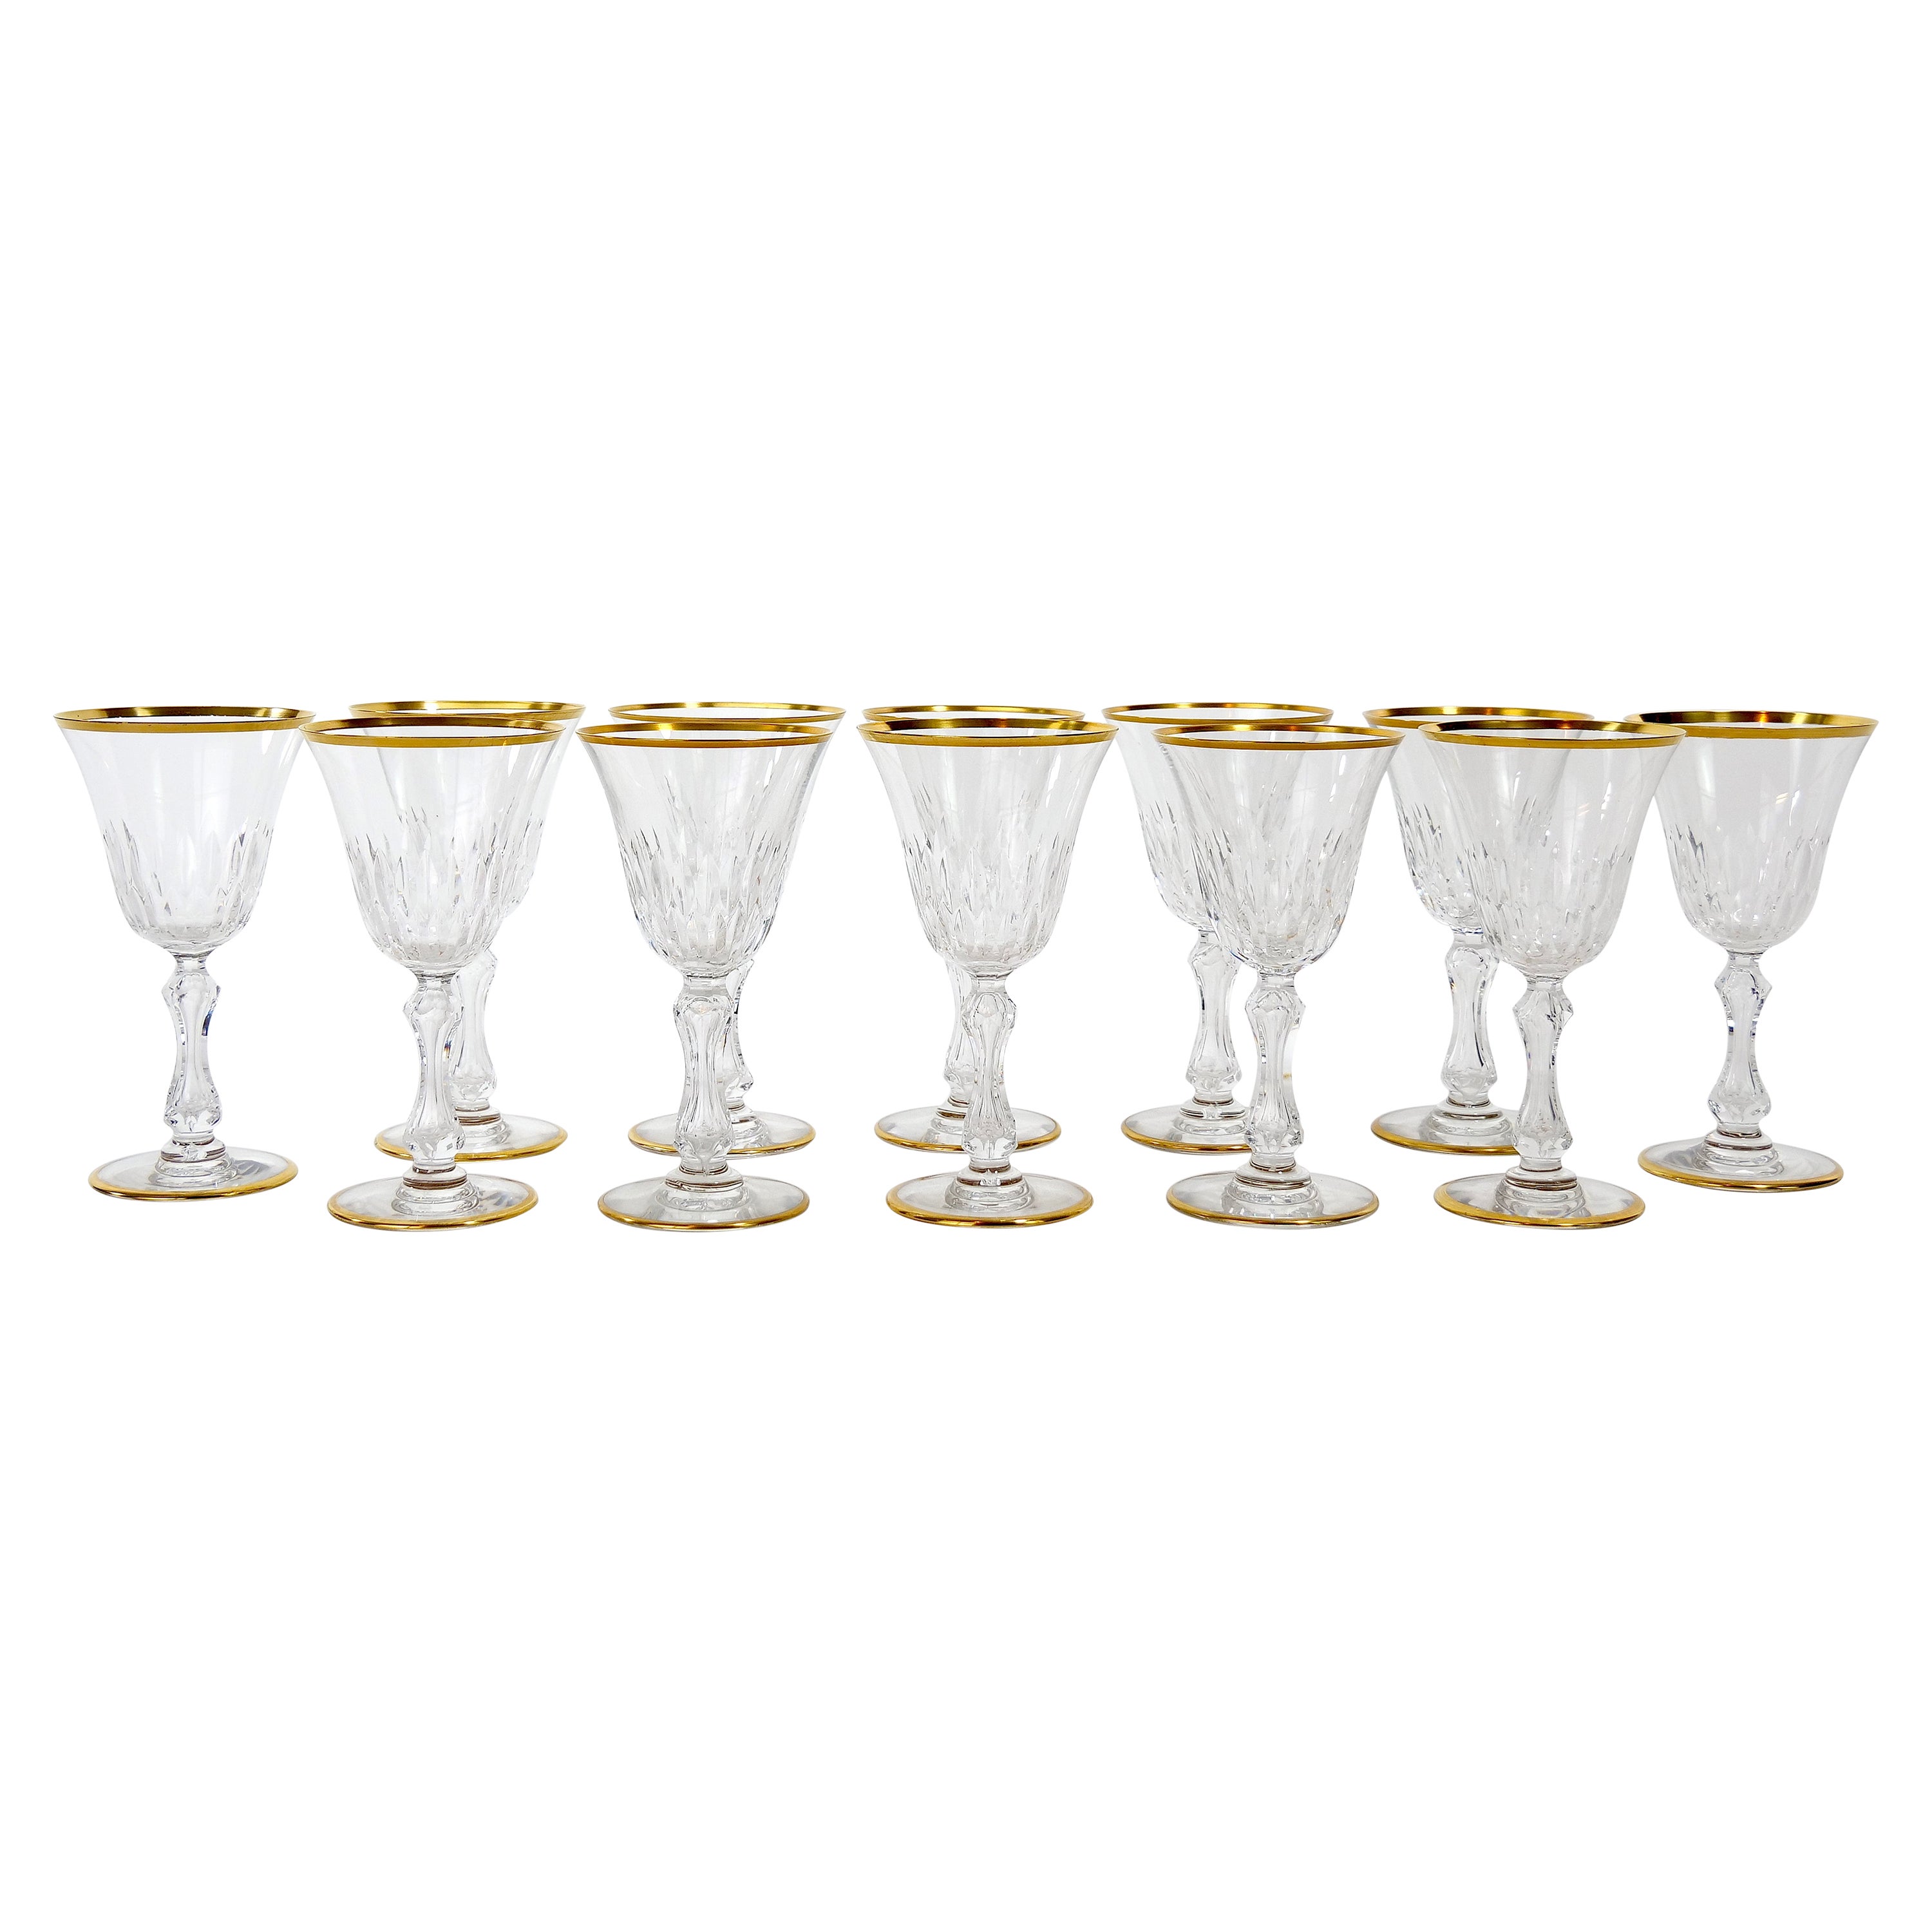 Large Saint Louis Crystal Gold Trim Wine / Water Service / 12 People For Sale